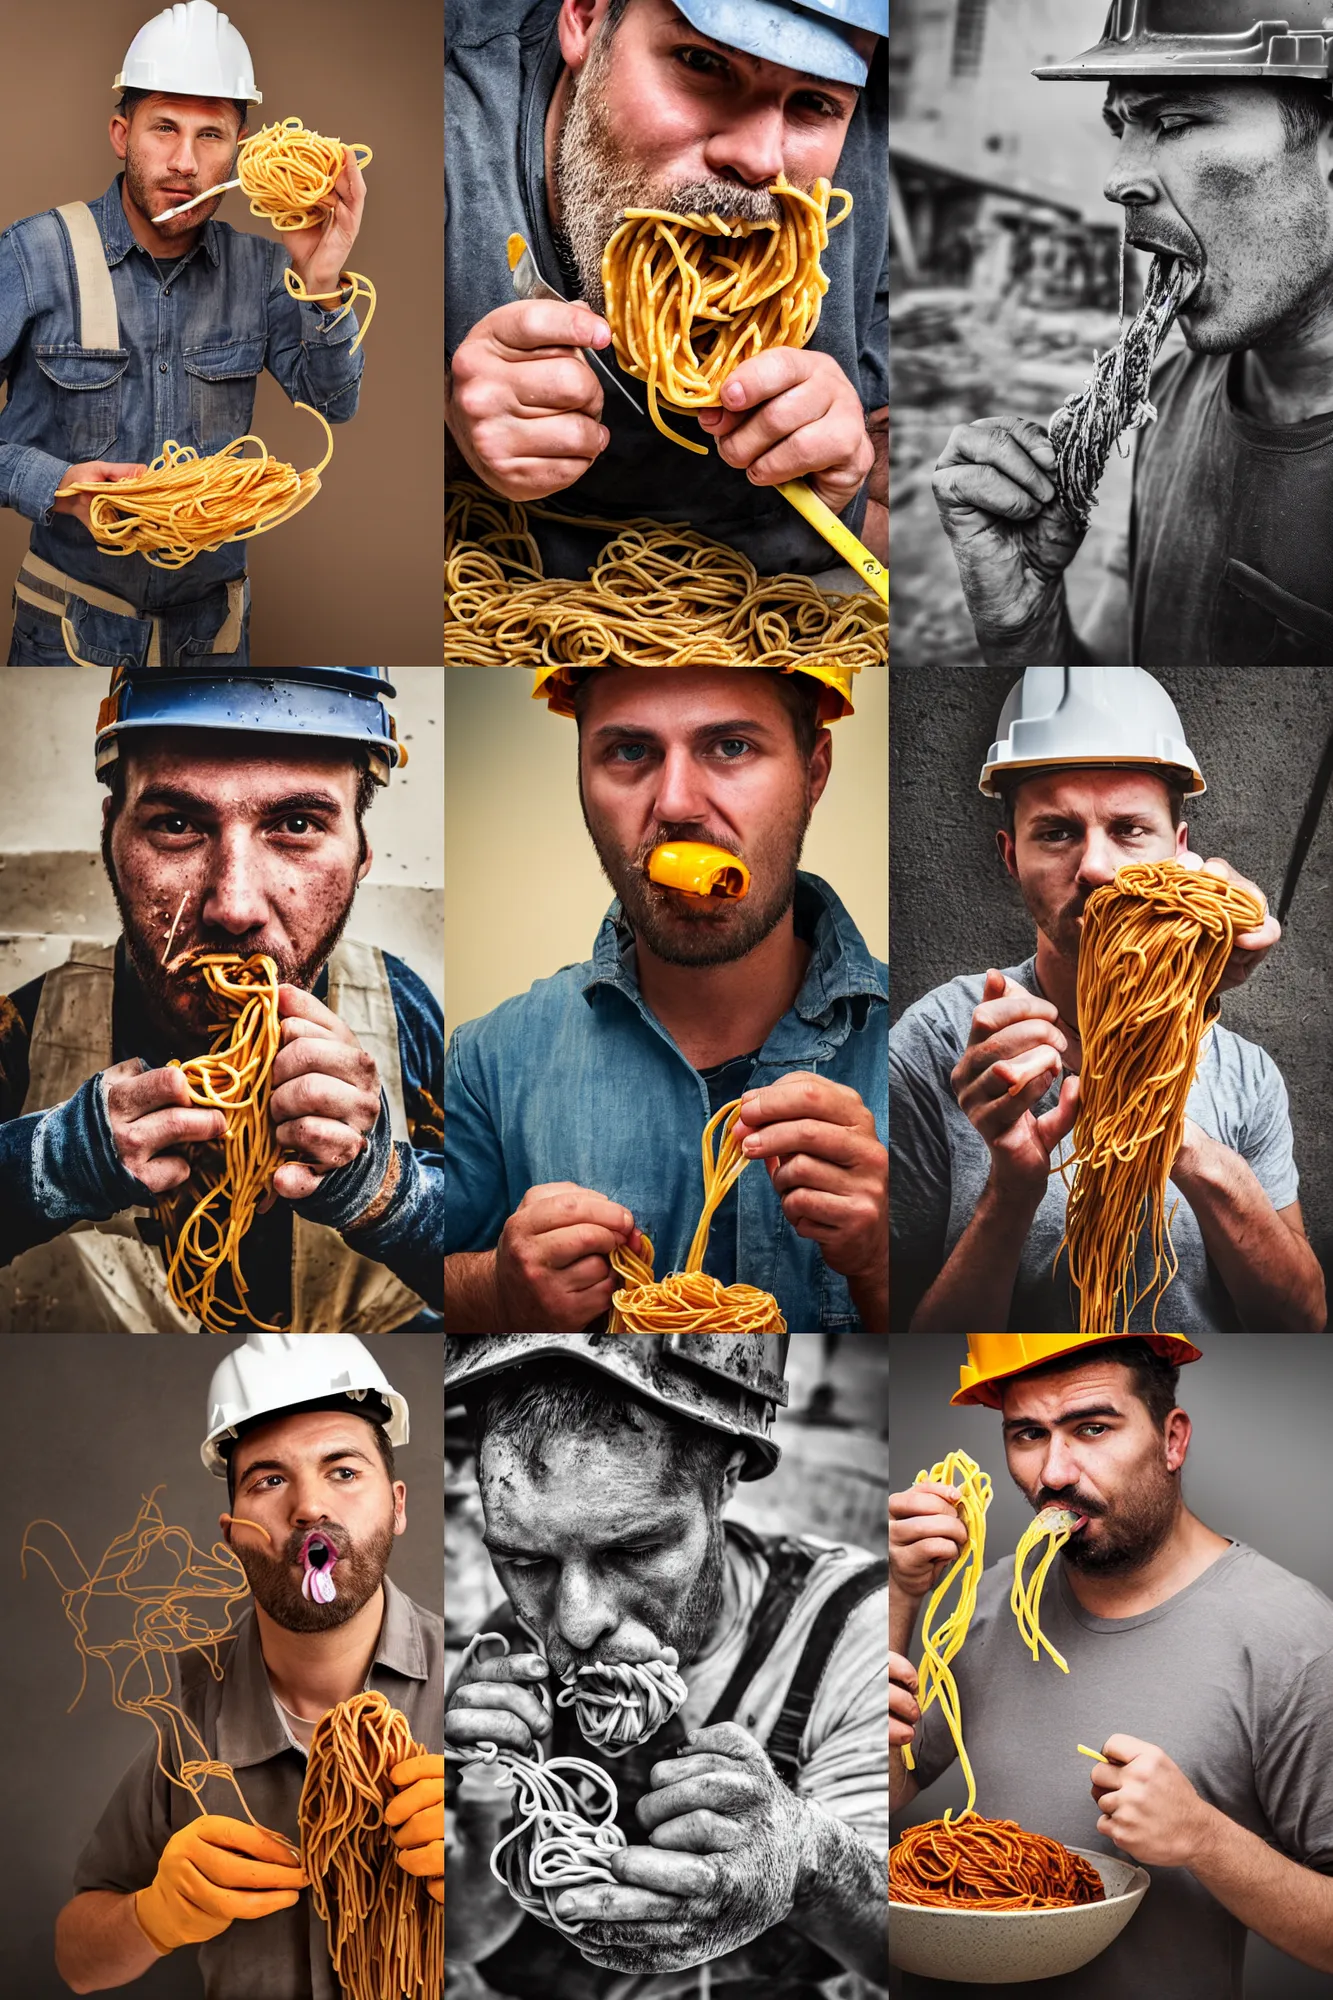 Prompt: extremely detailed portrait of construction worker, eating spaghetti from a bowl, using fork, lazy eyes, slurping spaghetti, dirty chin, full frame, award winning photo by unknown